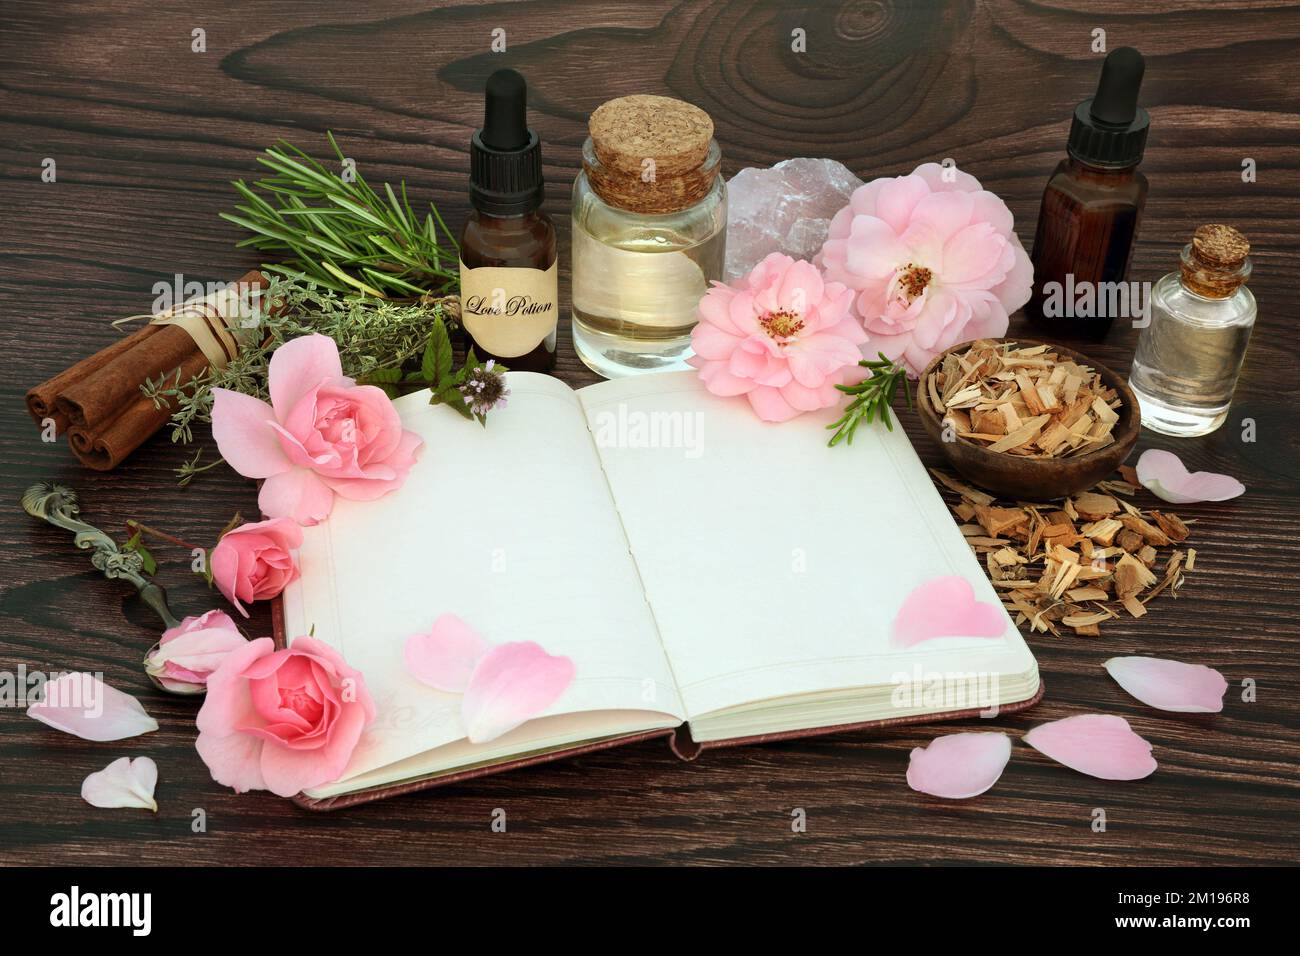 Aphrodisiac love potion preparation for Valentines Day. Magical spell recipe book or love letter with herbs, rose flowers, oil, spring water, crystal. Stock Photo